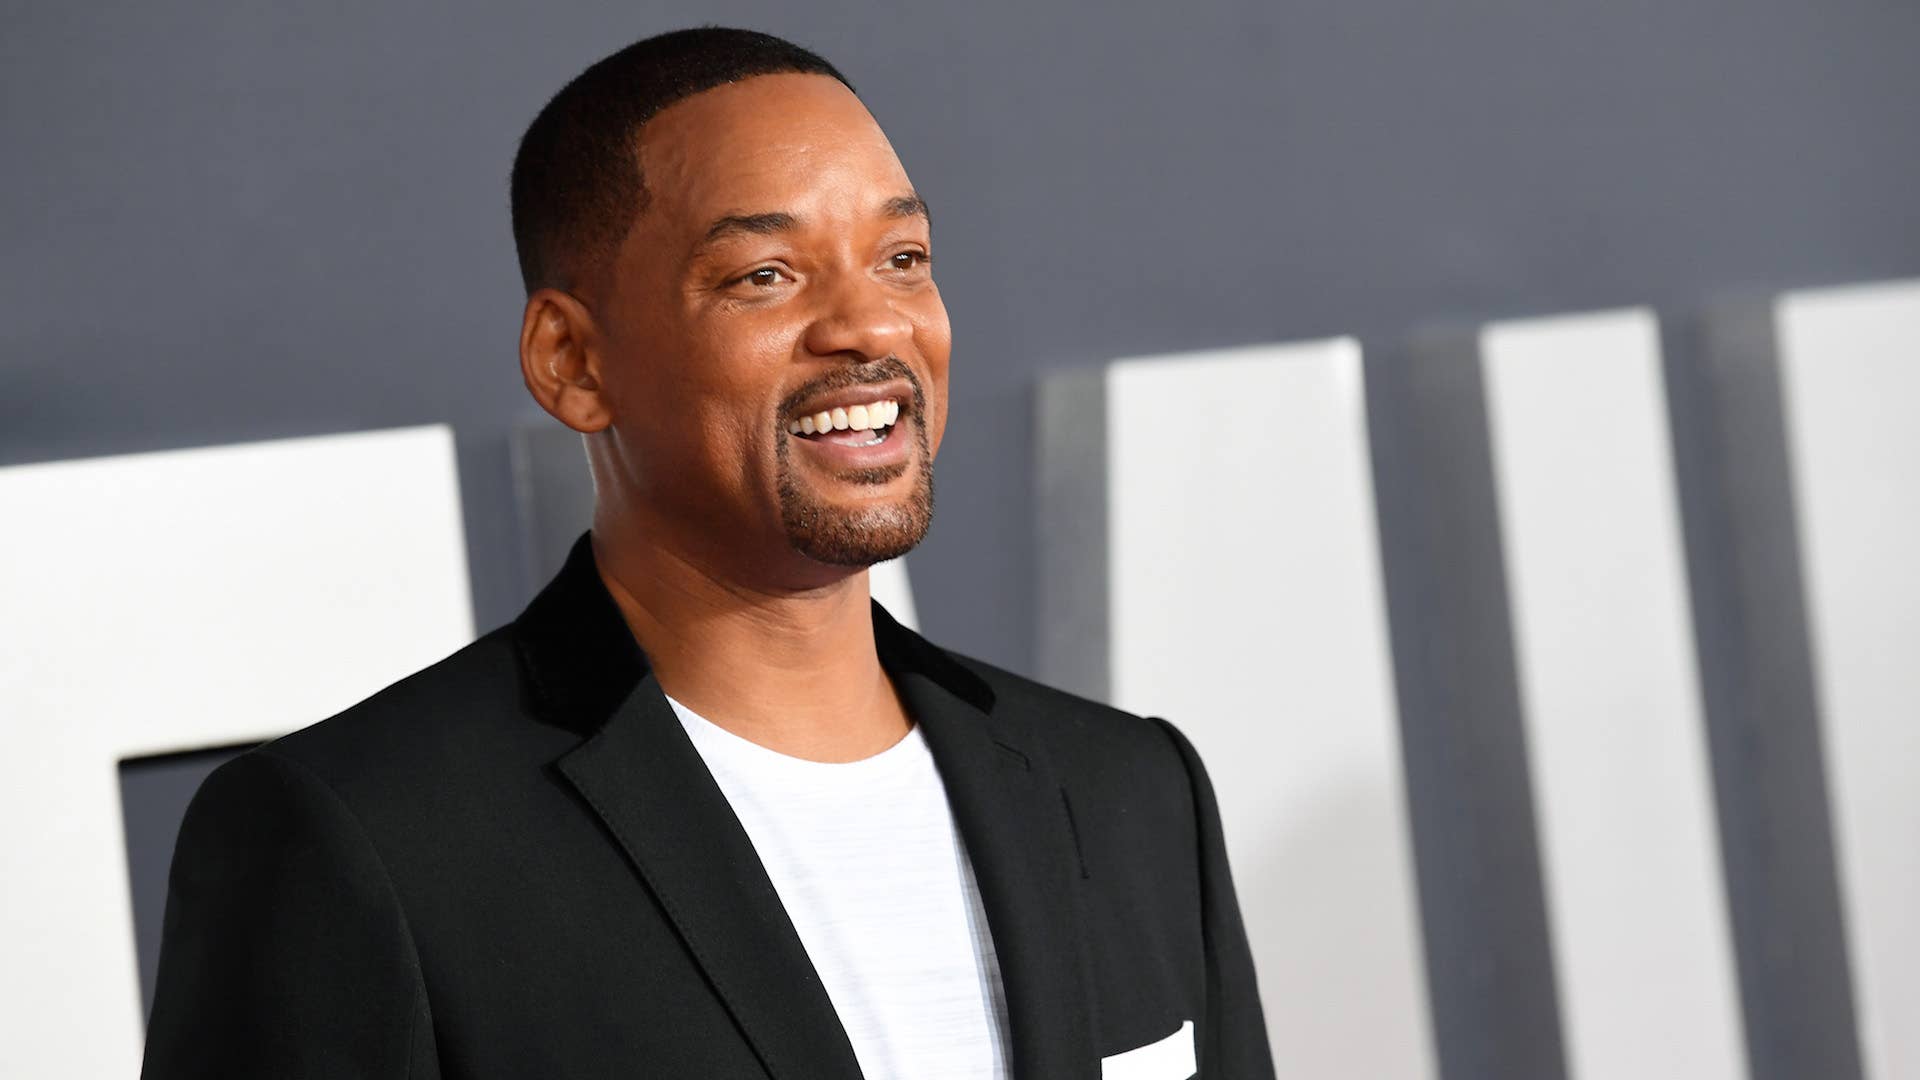 Will Smith attends Paramount Pictures' premiere of "Gemini Man"